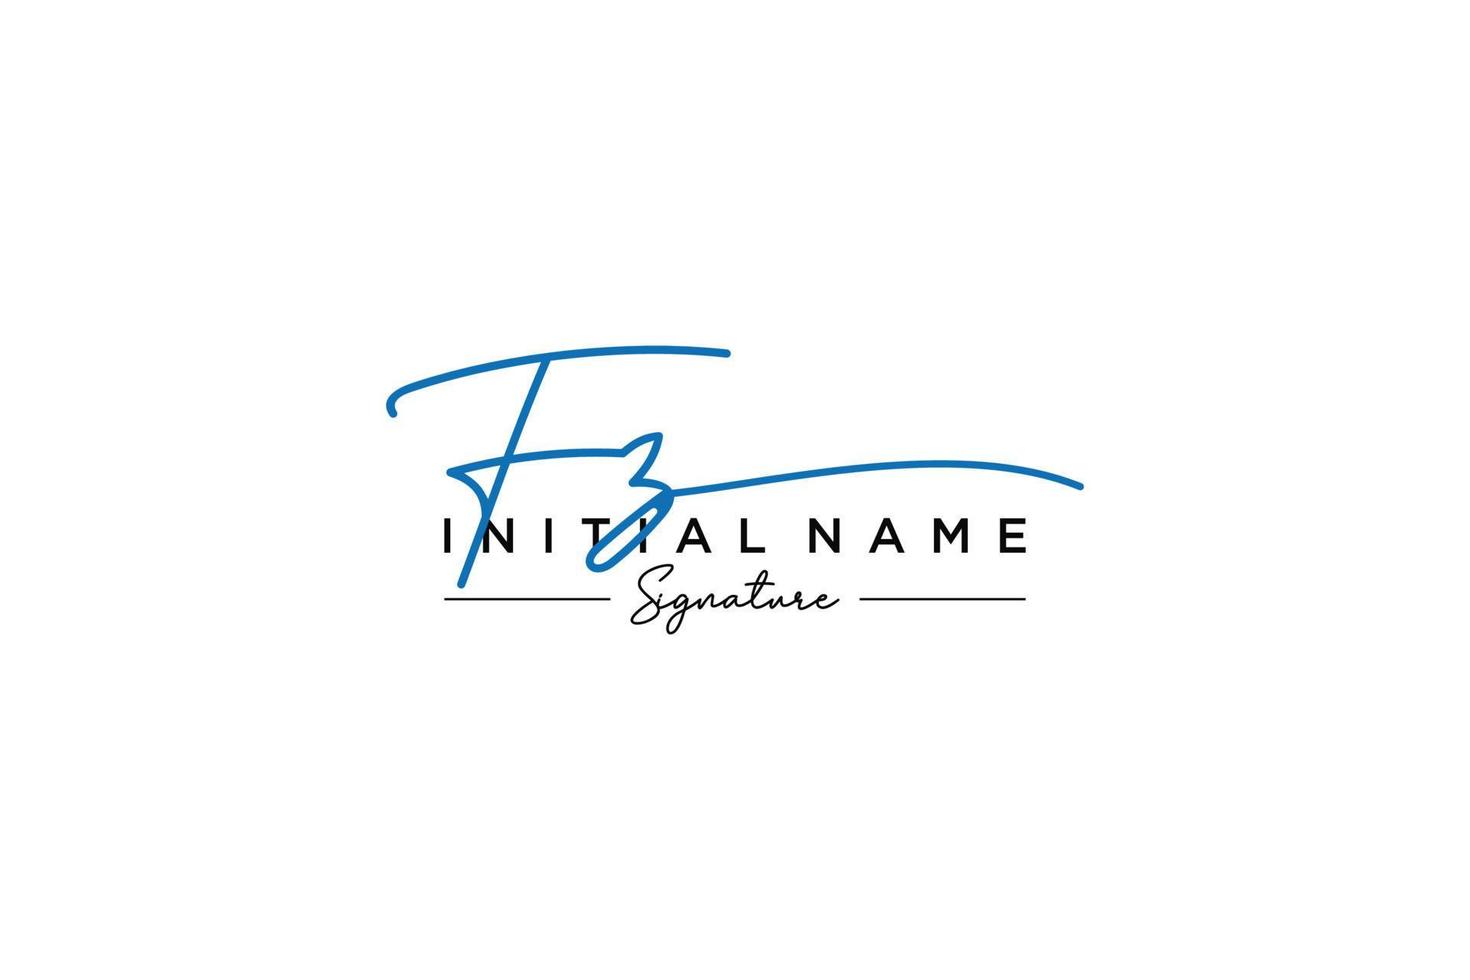 Initial FZ signature logo template vector. Hand drawn Calligraphy lettering Vector illustration.